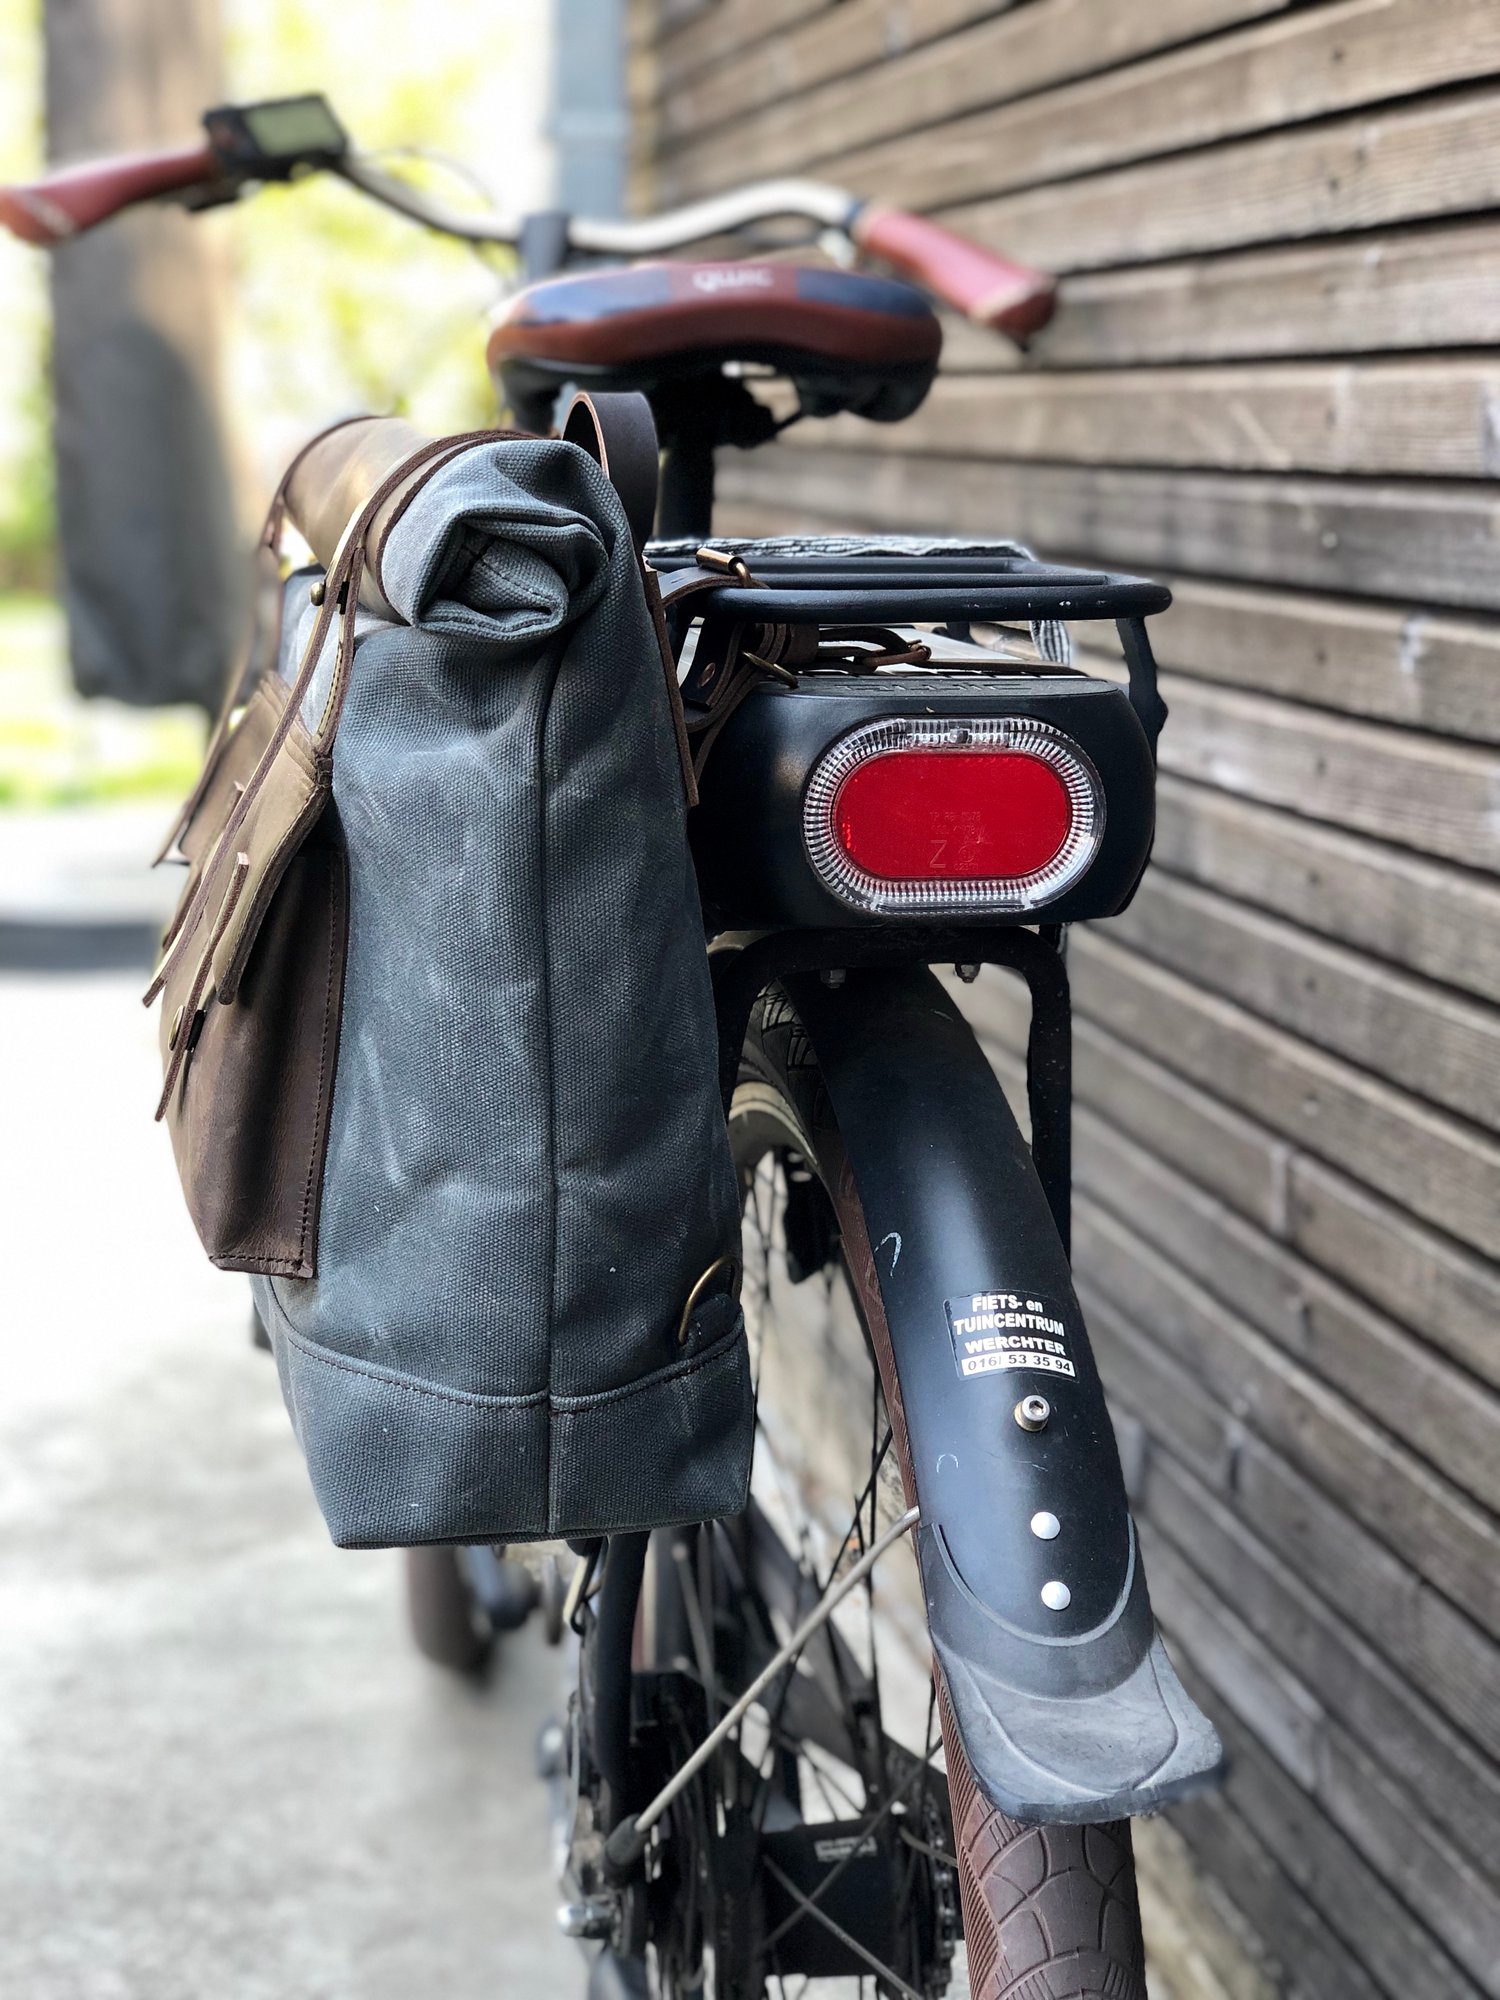 Image of Waxed canvas leather Motorbike bag Motorcycle bag Bicycle bag in waxed canvas and leather